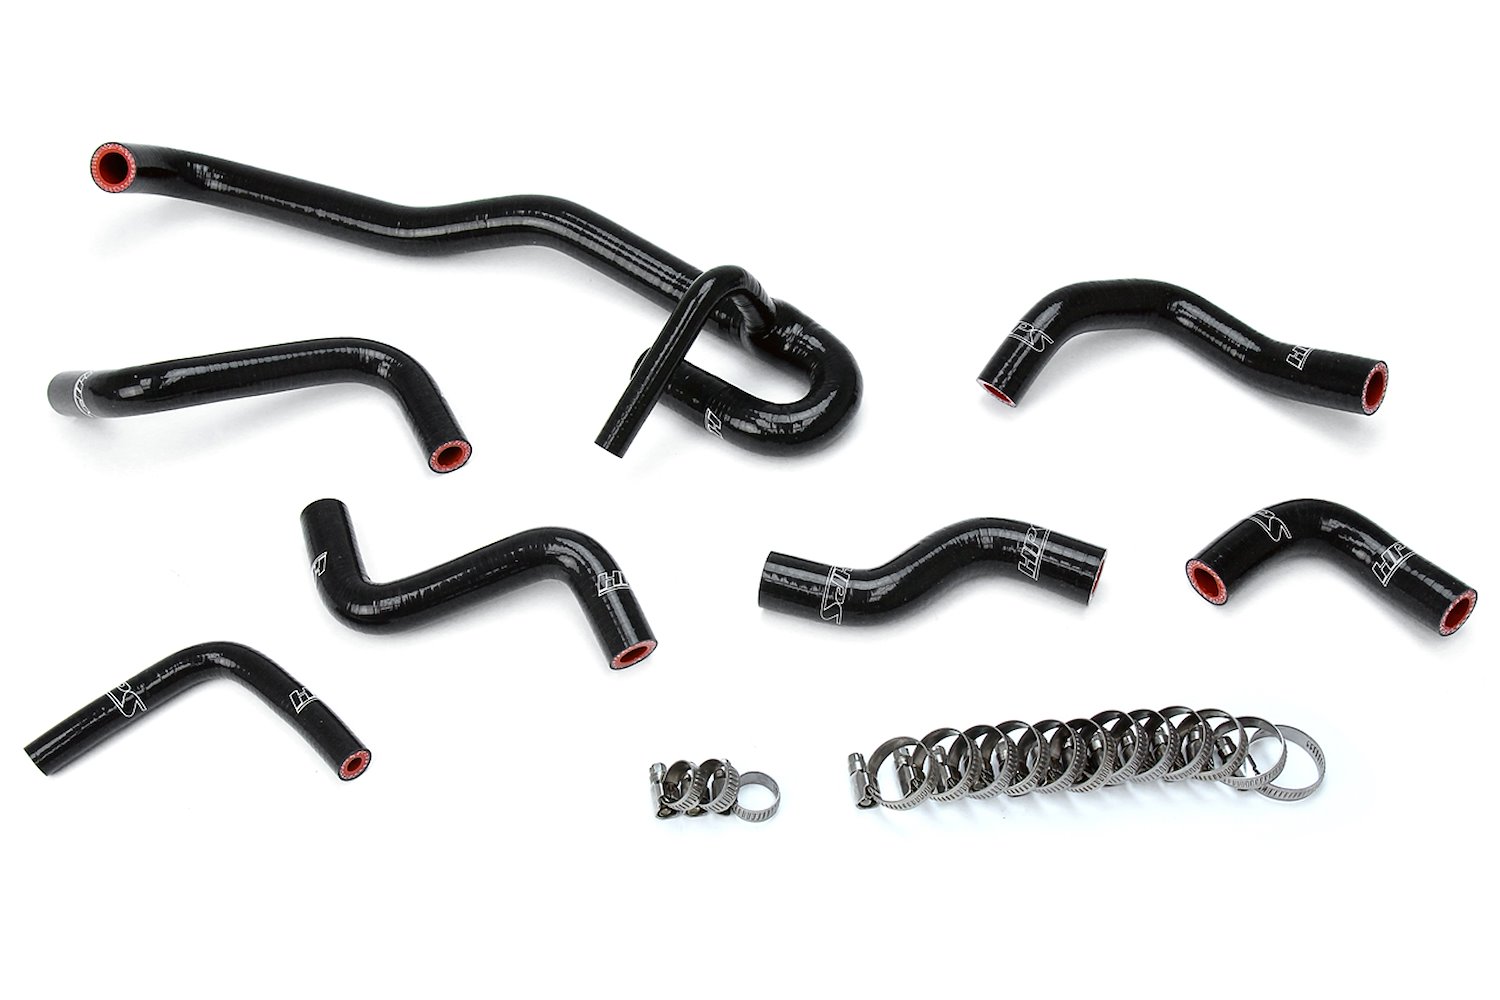 57-1766-BLK Heater Hose Kit, High-Temp 3-Ply Reinforced Silicone, Replace OEM Rubber Heater Coolant Hoses